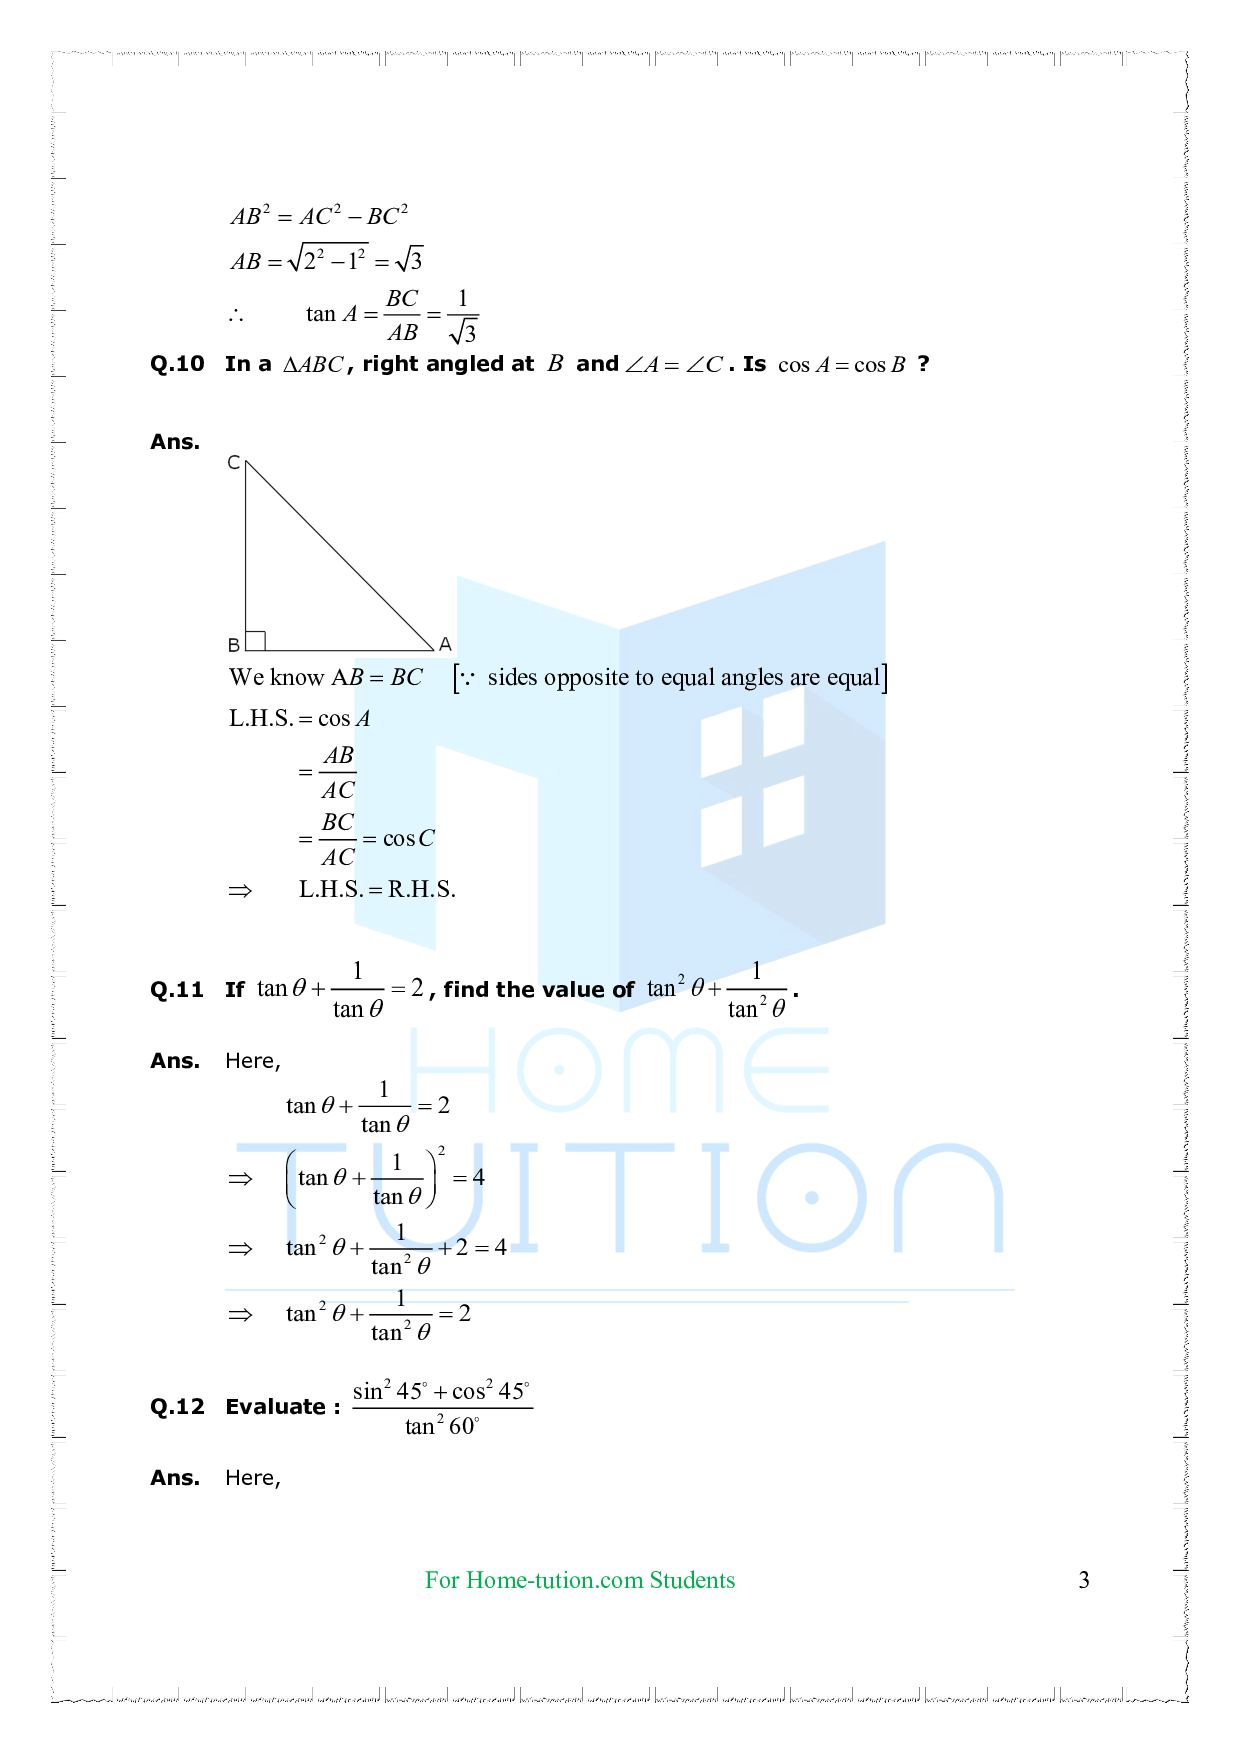 Chapter-8 Introduction to Trigonometry Questions